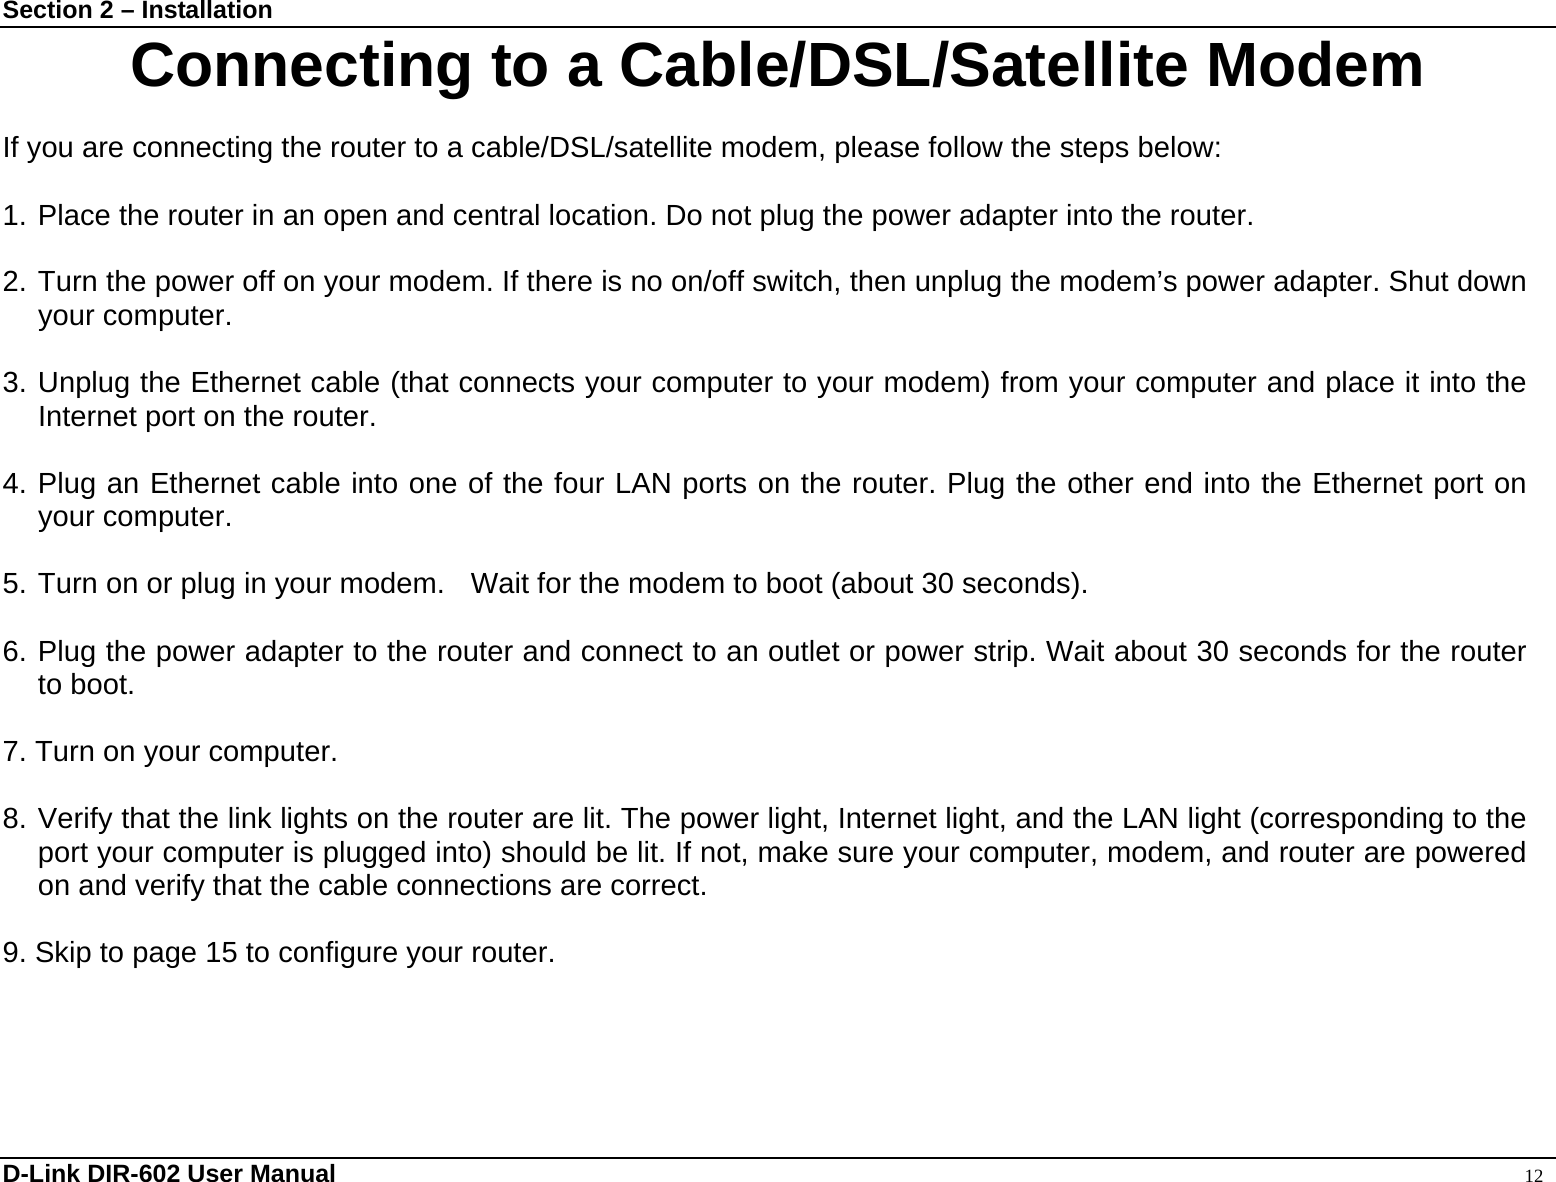 Section 2 – Installation  D-Link DIR-602 User Manual                                                                                               12 Connecting to a Cable/DSL/Satellite Modem  If you are connecting the router to a cable/DSL/satellite modem, please follow the steps below:  1. Place the router in an open and central location. Do not plug the power adapter into the router.    2. Turn the power off on your modem. If there is no on/off switch, then unplug the modem’s power adapter. Shut down your computer.  3. Unplug the Ethernet cable (that connects your computer to your modem) from your computer and place it into the Internet port on the router.      4. Plug an Ethernet cable into one of the four LAN ports on the router. Plug the other end into the Ethernet port on your computer.  5. Turn on or plug in your modem.    Wait for the modem to boot (about 30 seconds).    6. Plug the power adapter to the router and connect to an outlet or power strip. Wait about 30 seconds for the router to boot.    7. Turn on your computer.    8. Verify that the link lights on the router are lit. The power light, Internet light, and the LAN light (corresponding to the port your computer is plugged into) should be lit. If not, make sure your computer, modem, and router are powered on and verify that the cable connections are correct.    9. Skip to page 15 to configure your router.    